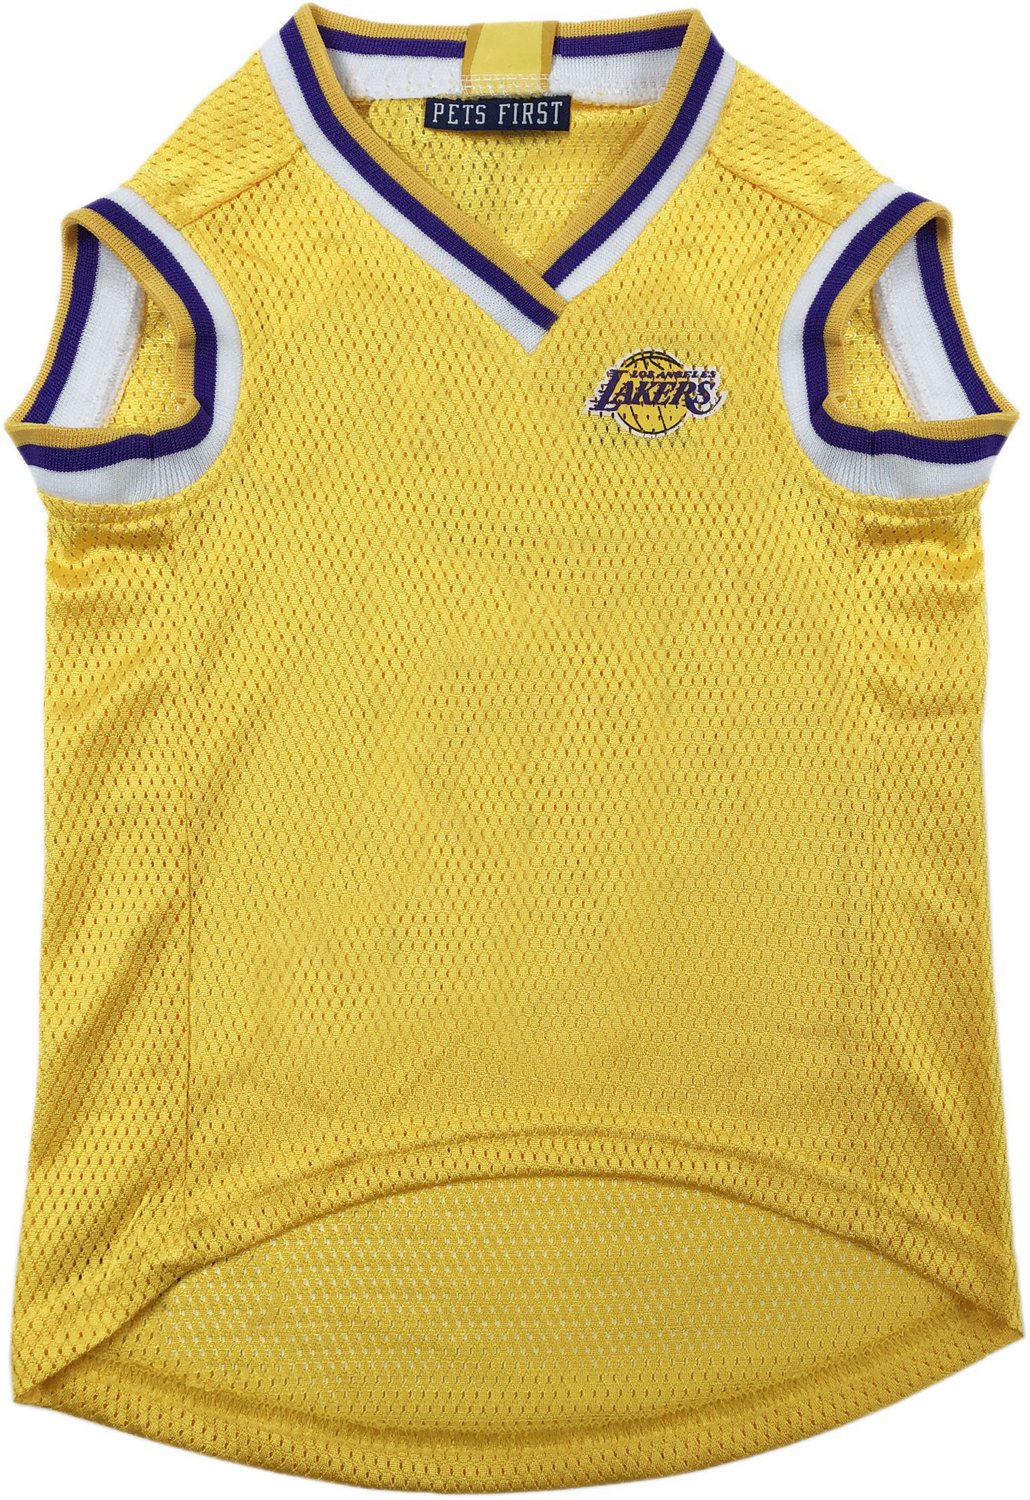 Pets First Los Angeles Lakers Mesh Dog Jersey